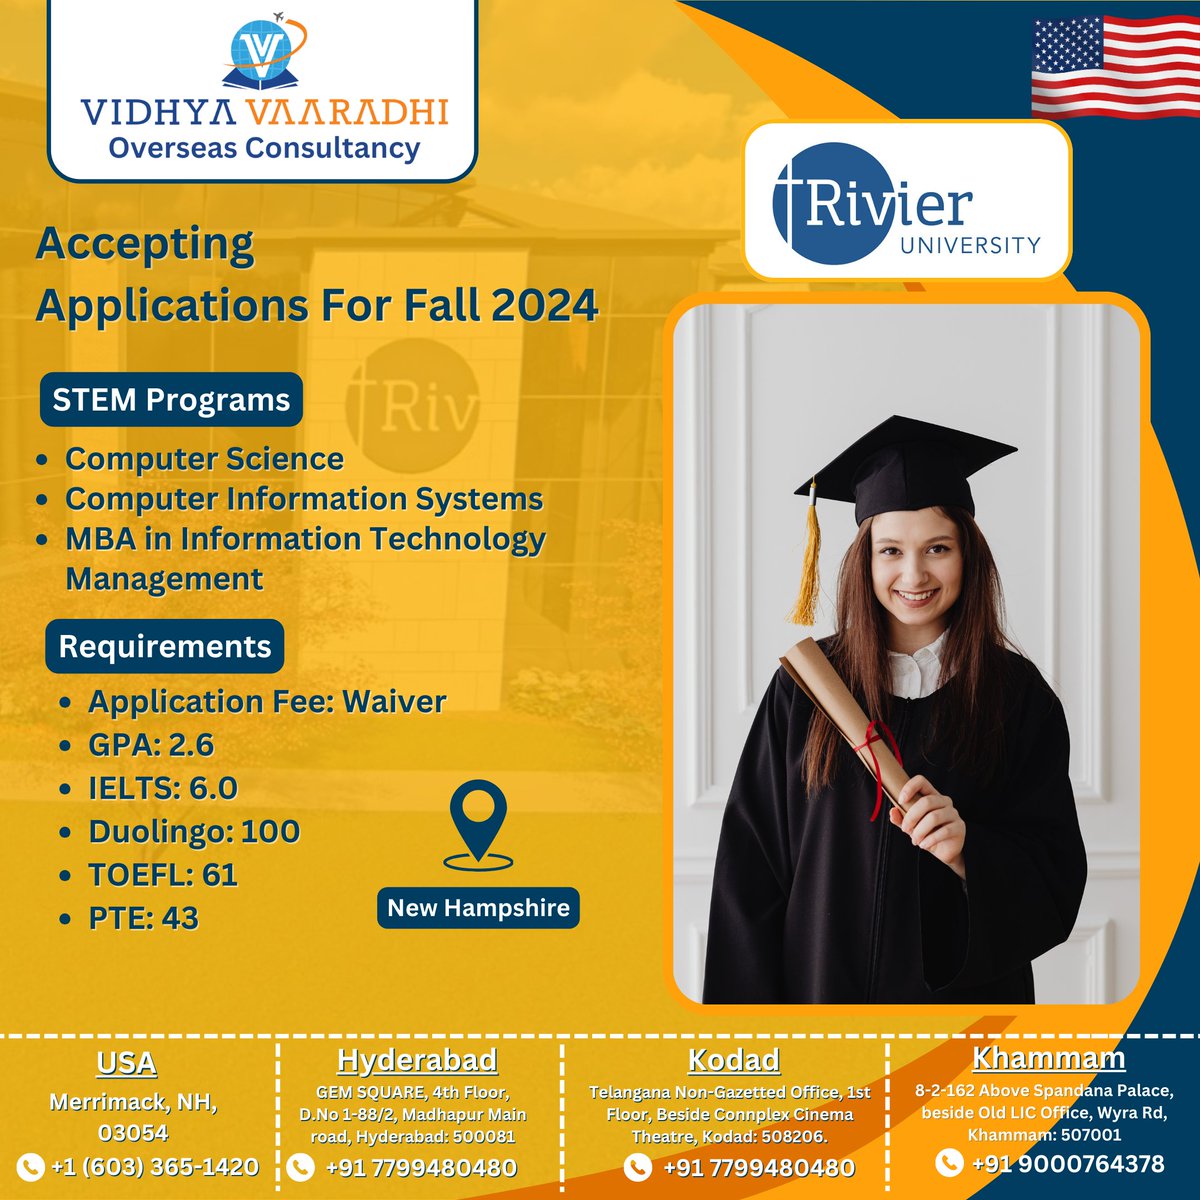 Explore educational opportunities in the USA! Accepting Applications for the Fall 2024 intake at Rivier University in Nashua. Apply now!

 #RivierUniversity #fall2024ApplicationsOpen #nashua #vidhyavaaradhi #fall2024intake #computerscience #mba #computerinformationsystemsoption